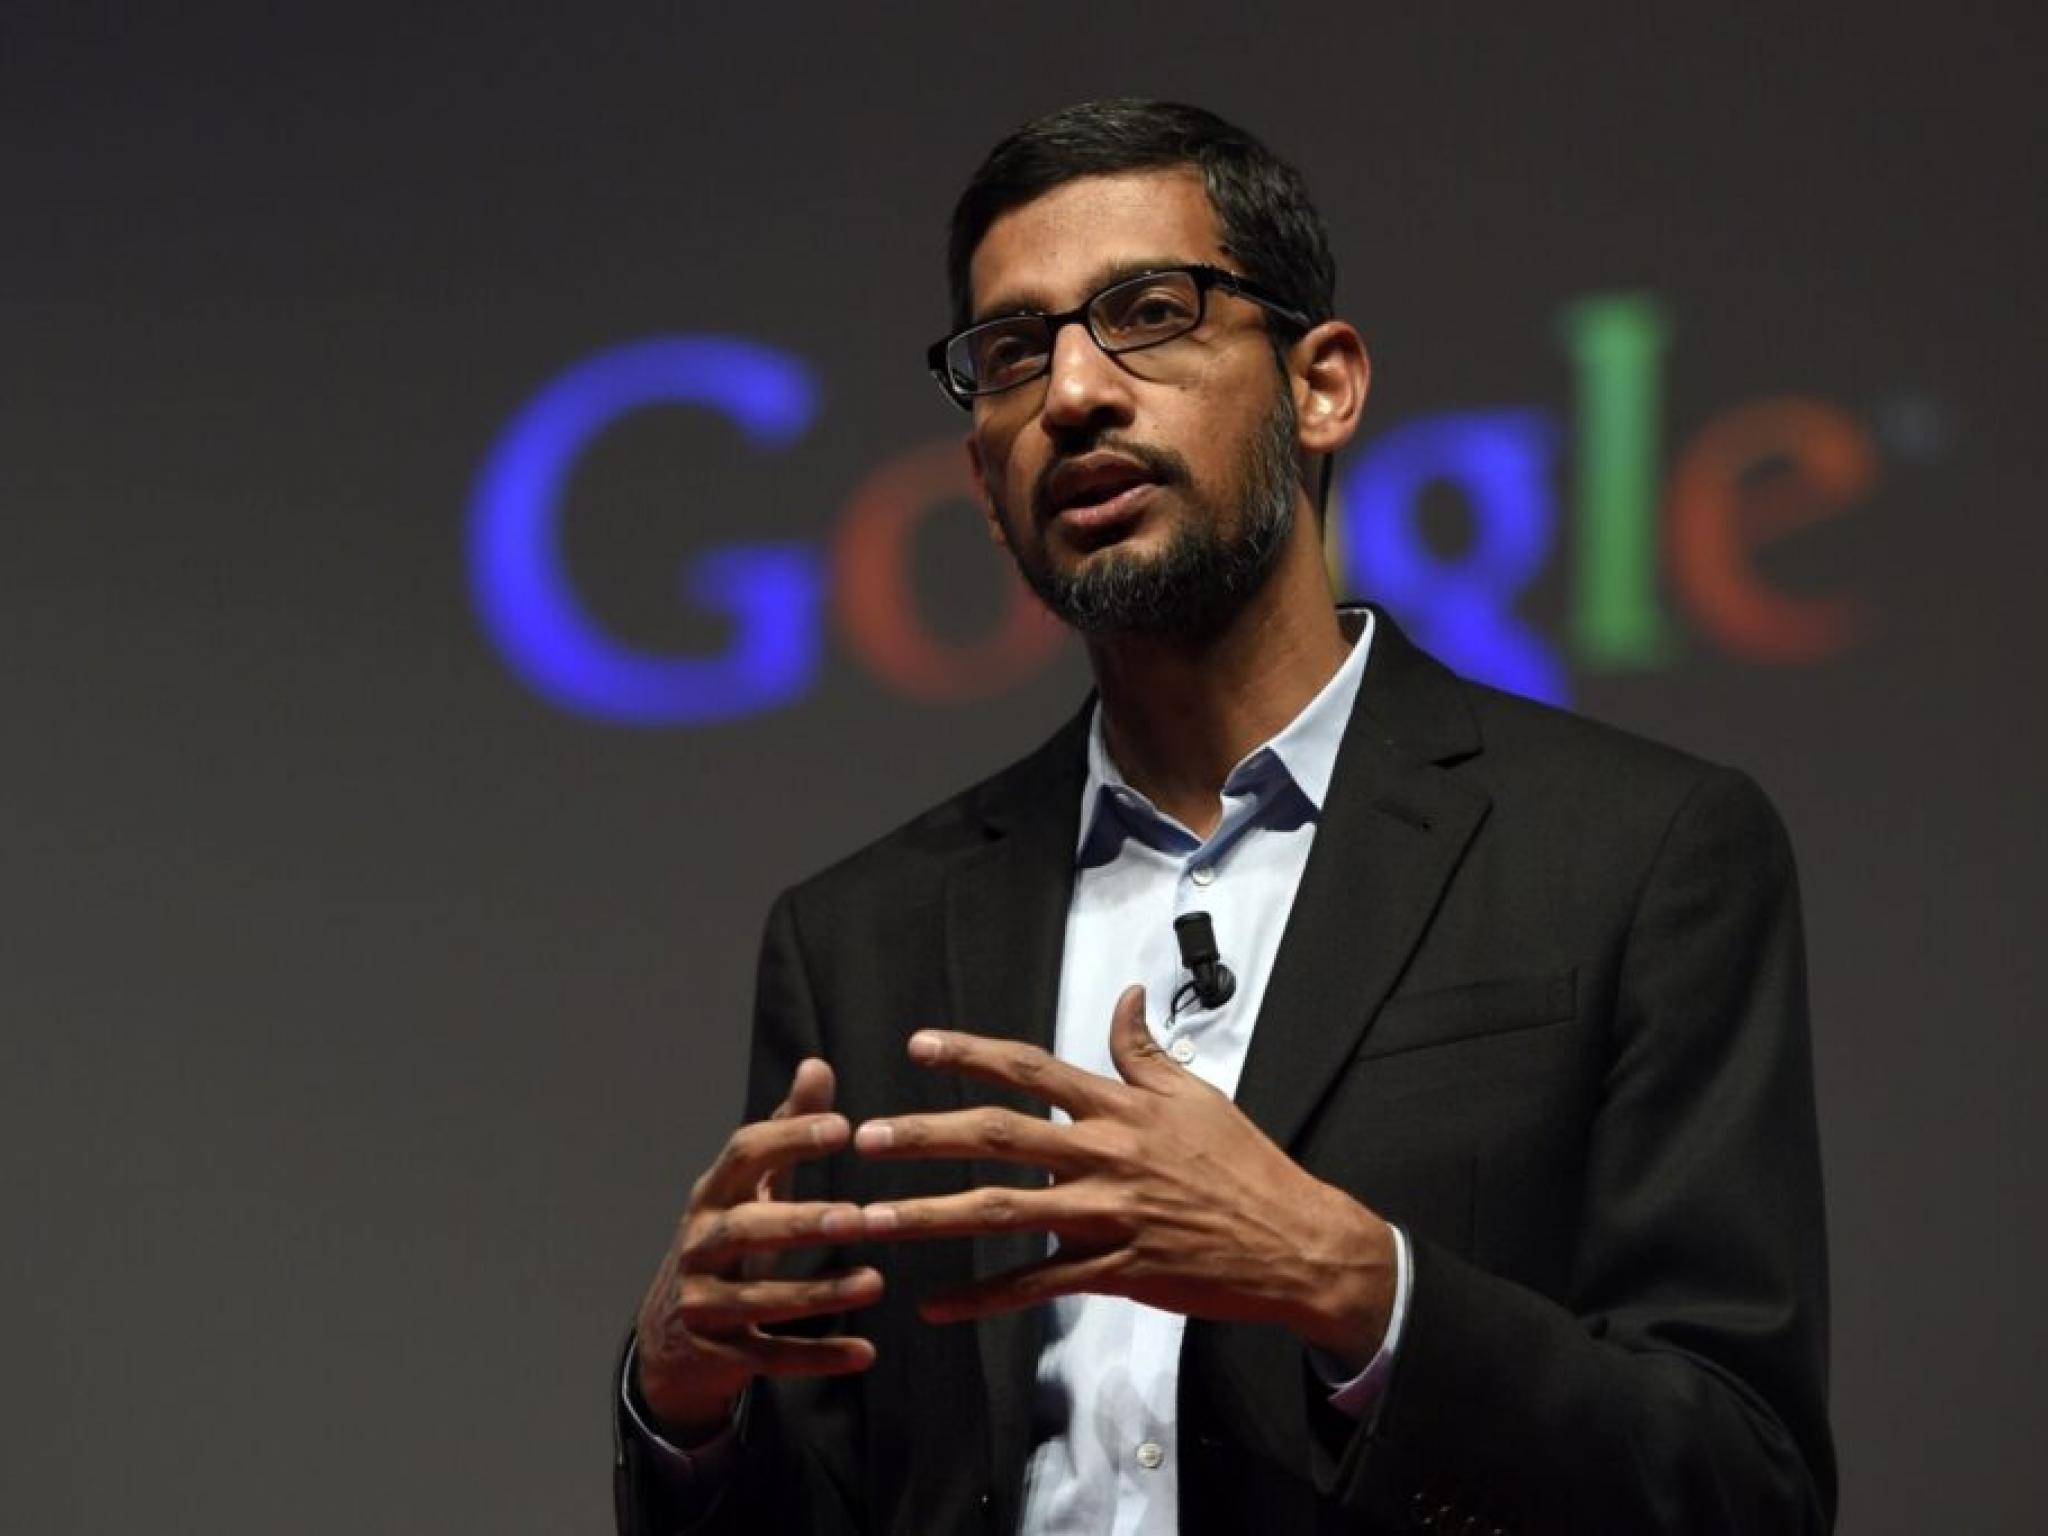  sundar-pichai-announces-restructure-after-google-fires-protesting-employees-too-important-a-moment-as-a-company-to-be-distracted 